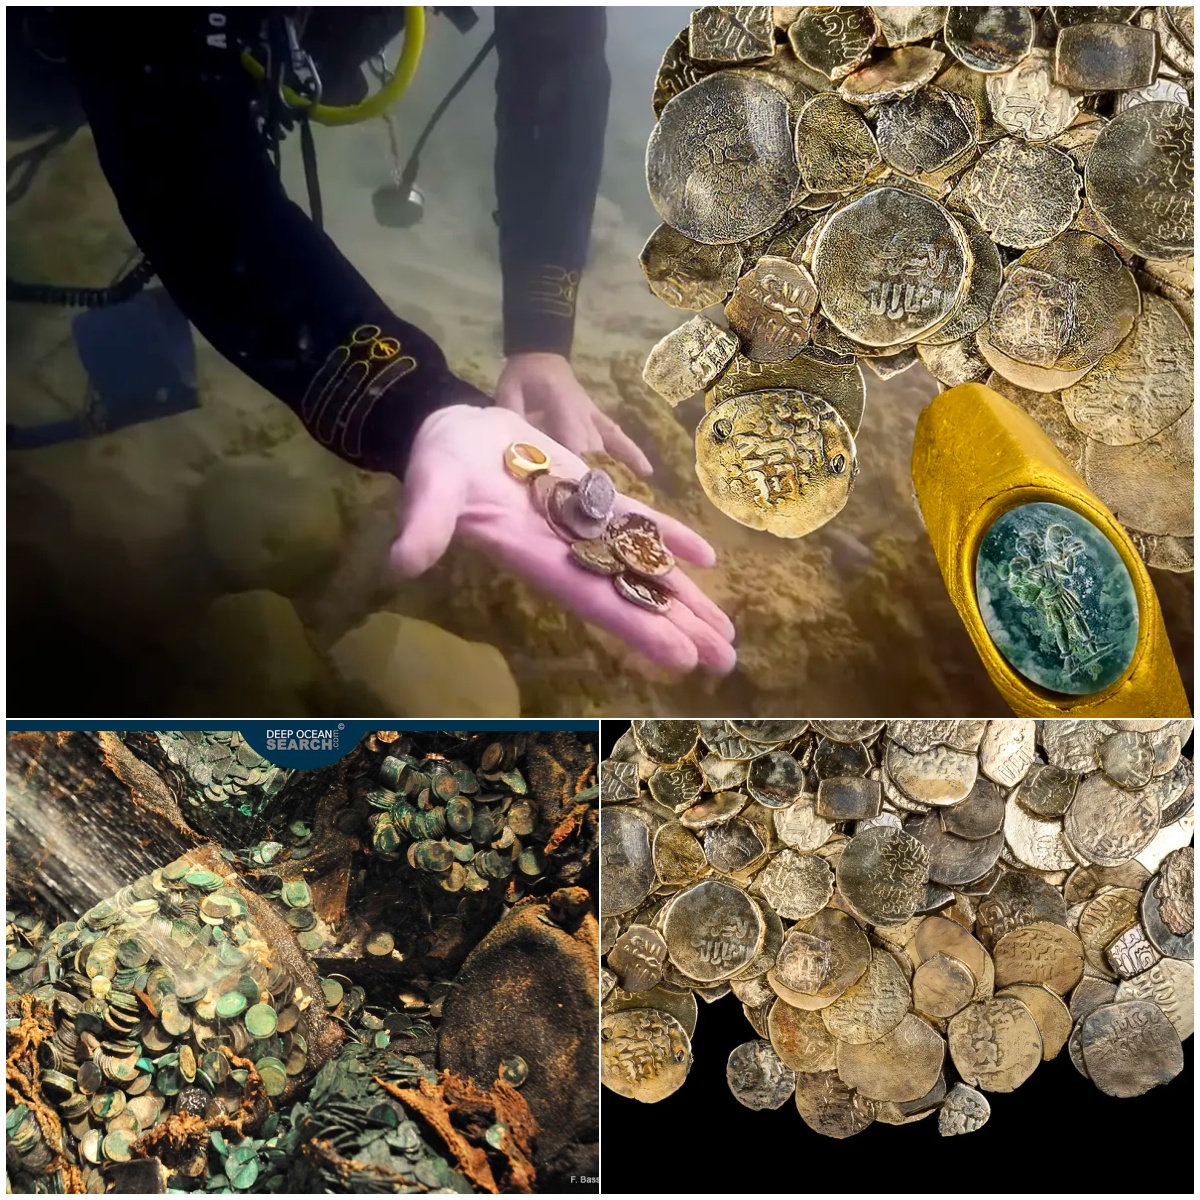 Discovery of unique ‘Good Shepherd’ gold ring and 1,800-year-old treasure from two ancient shipwrecks from between the 3rd and 14th centuries discovered in the same location off the coast of Caesarea